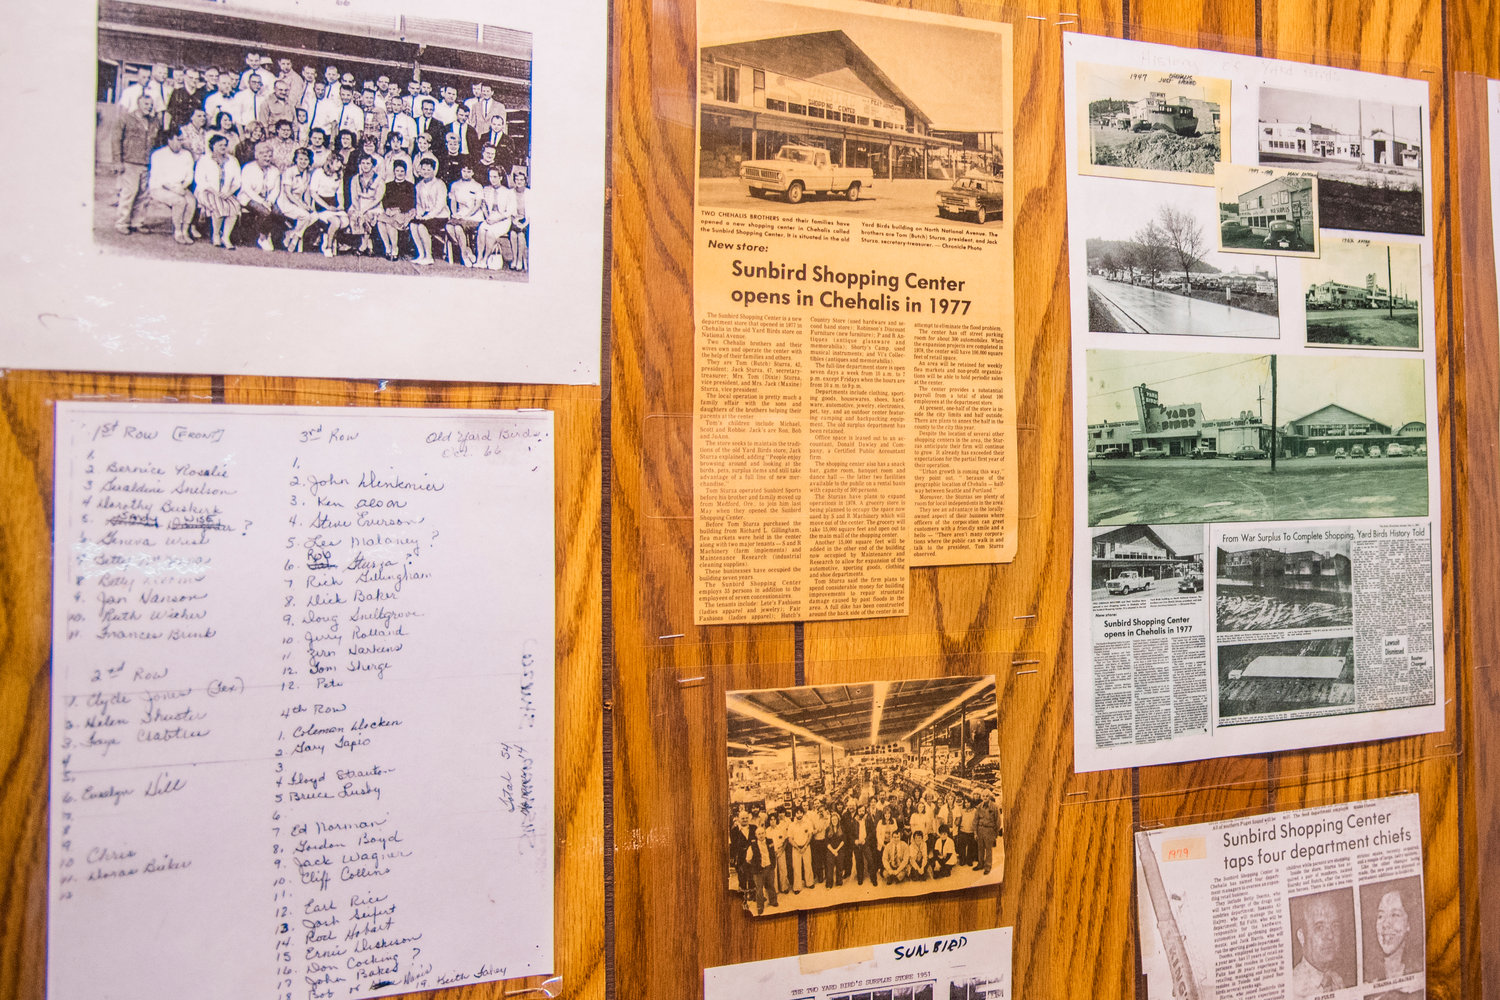 A news clipping is displayed inside the Sunbird Shopping Center from when the business opened in 1977 at the Chehalis location.